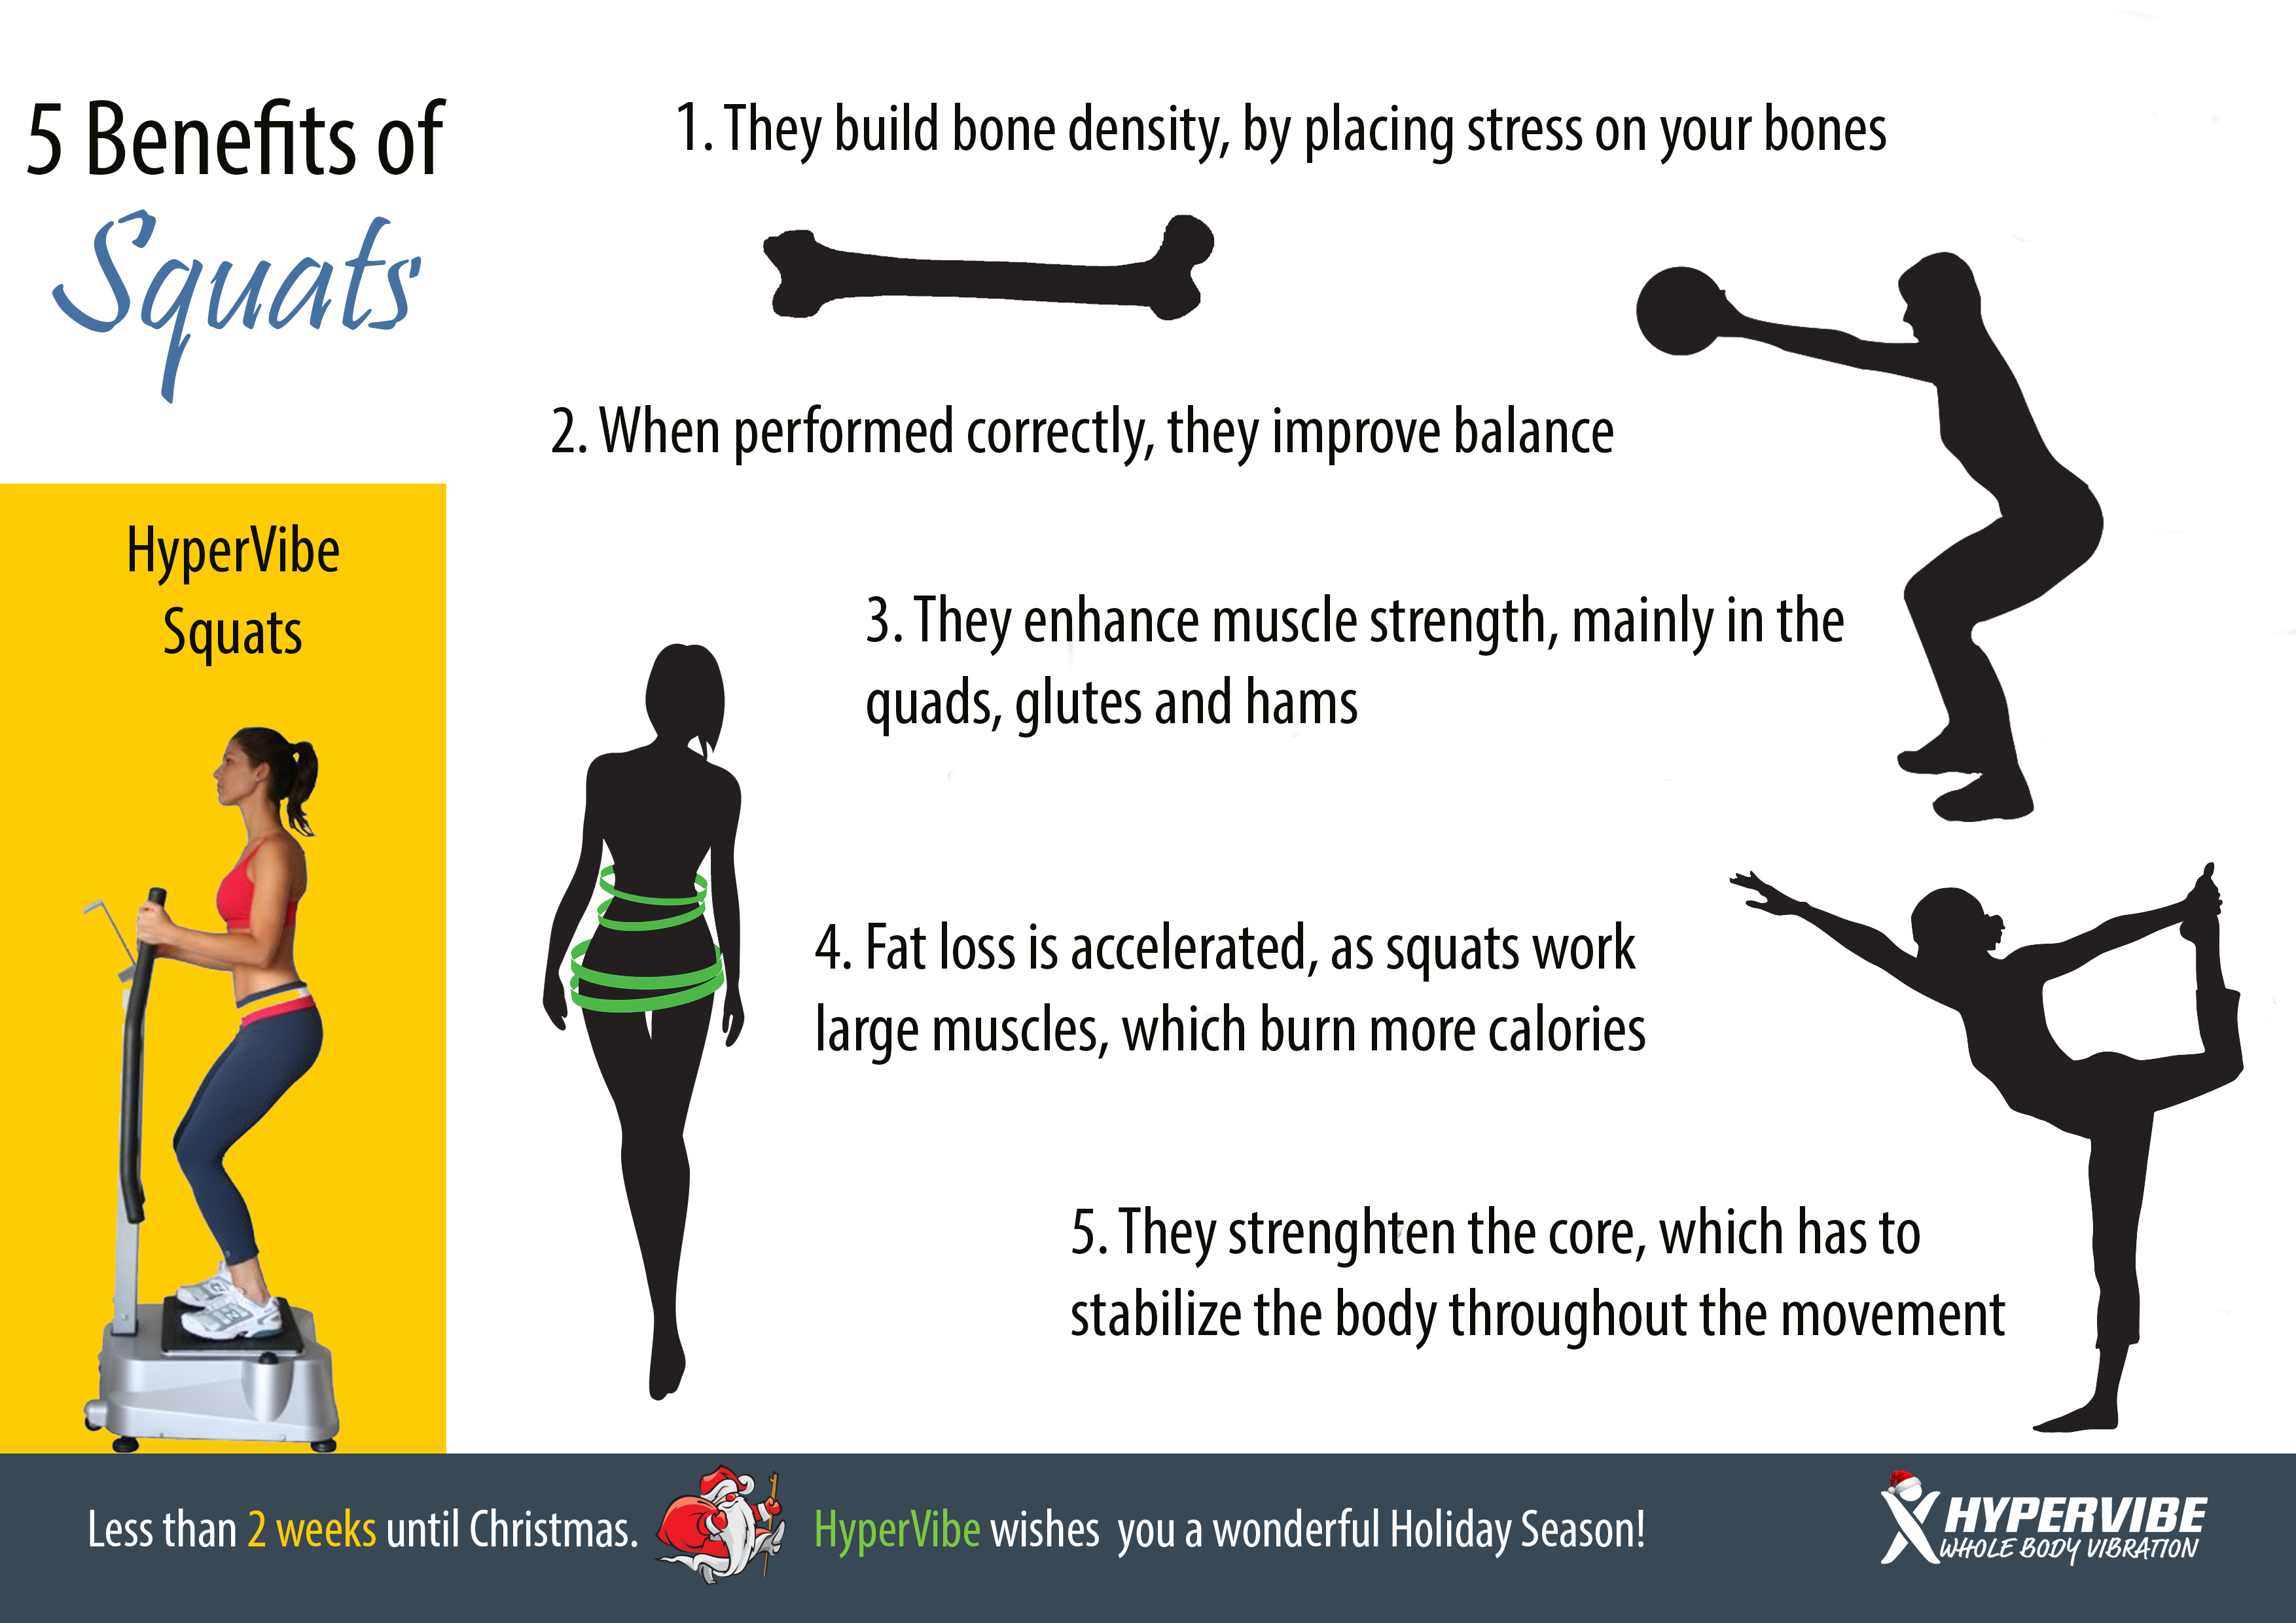 Full Body Workout - What Are The Benefits For You?